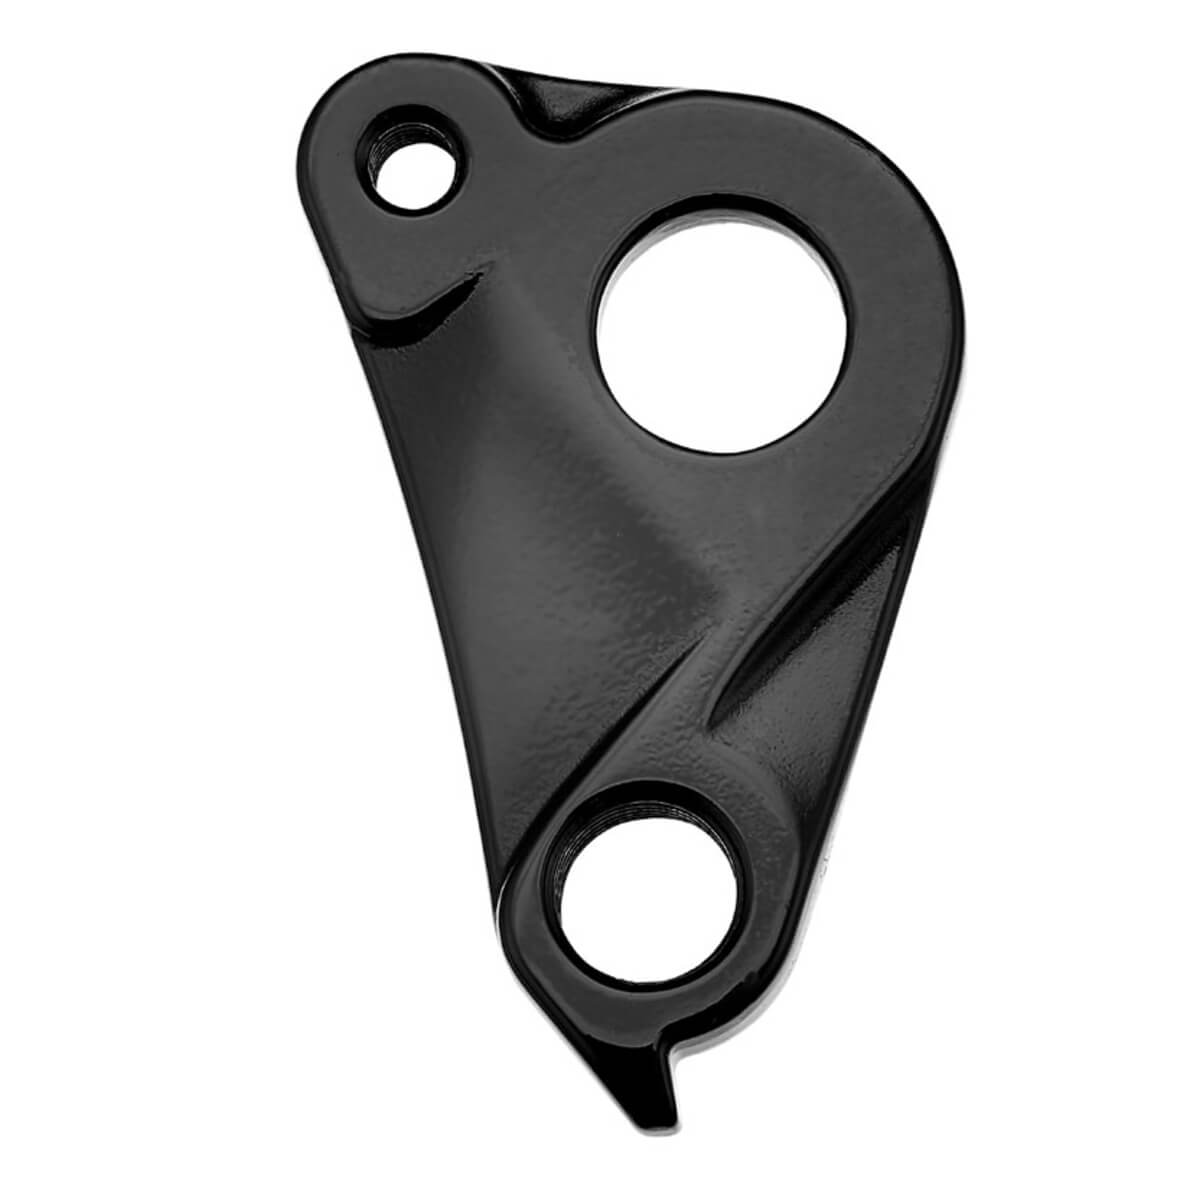 Marwi UNION GH-302 derailleur hanger for Specialized bicycle models #S162600004 rear side